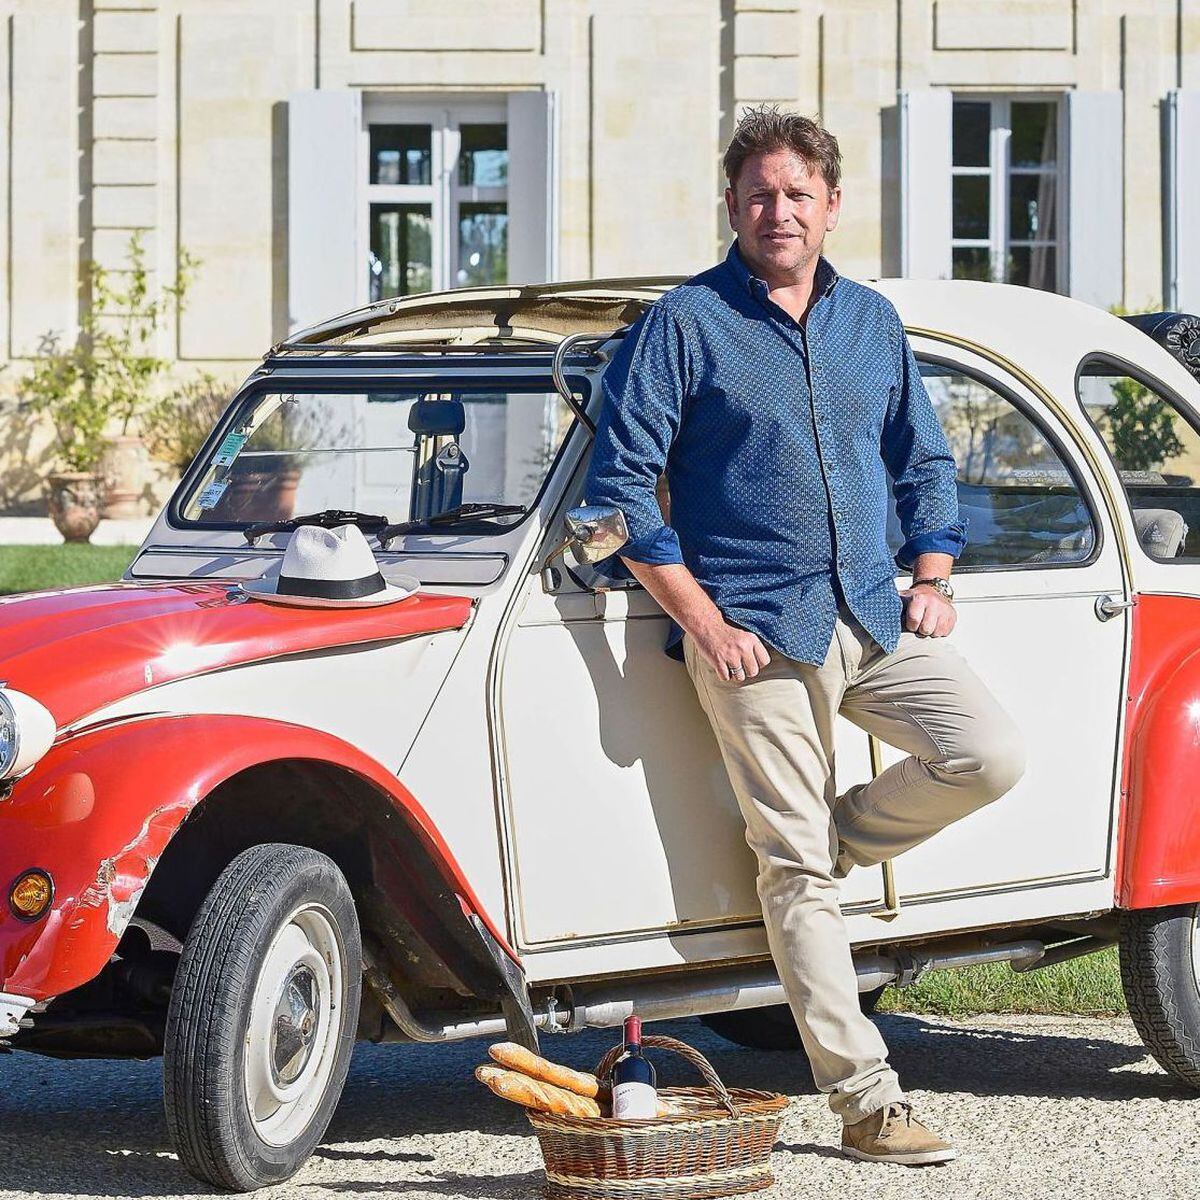 ‘Cars are like my kids’ – the chef’s a motor enthusiast